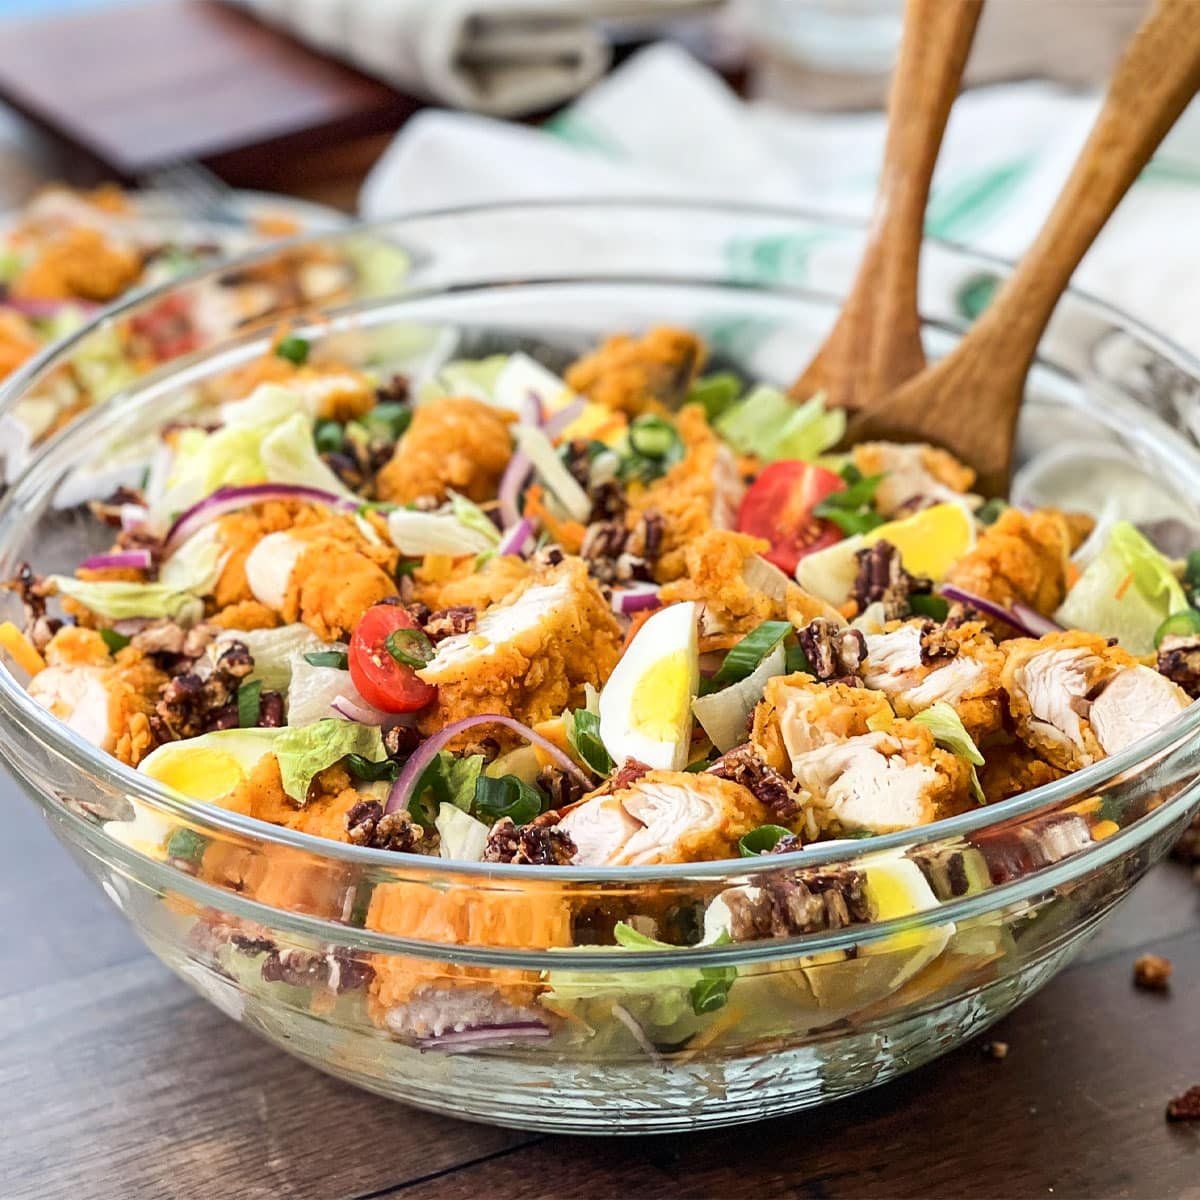 Large glass bowl of crispy chicken salad with wooden serving spoons.